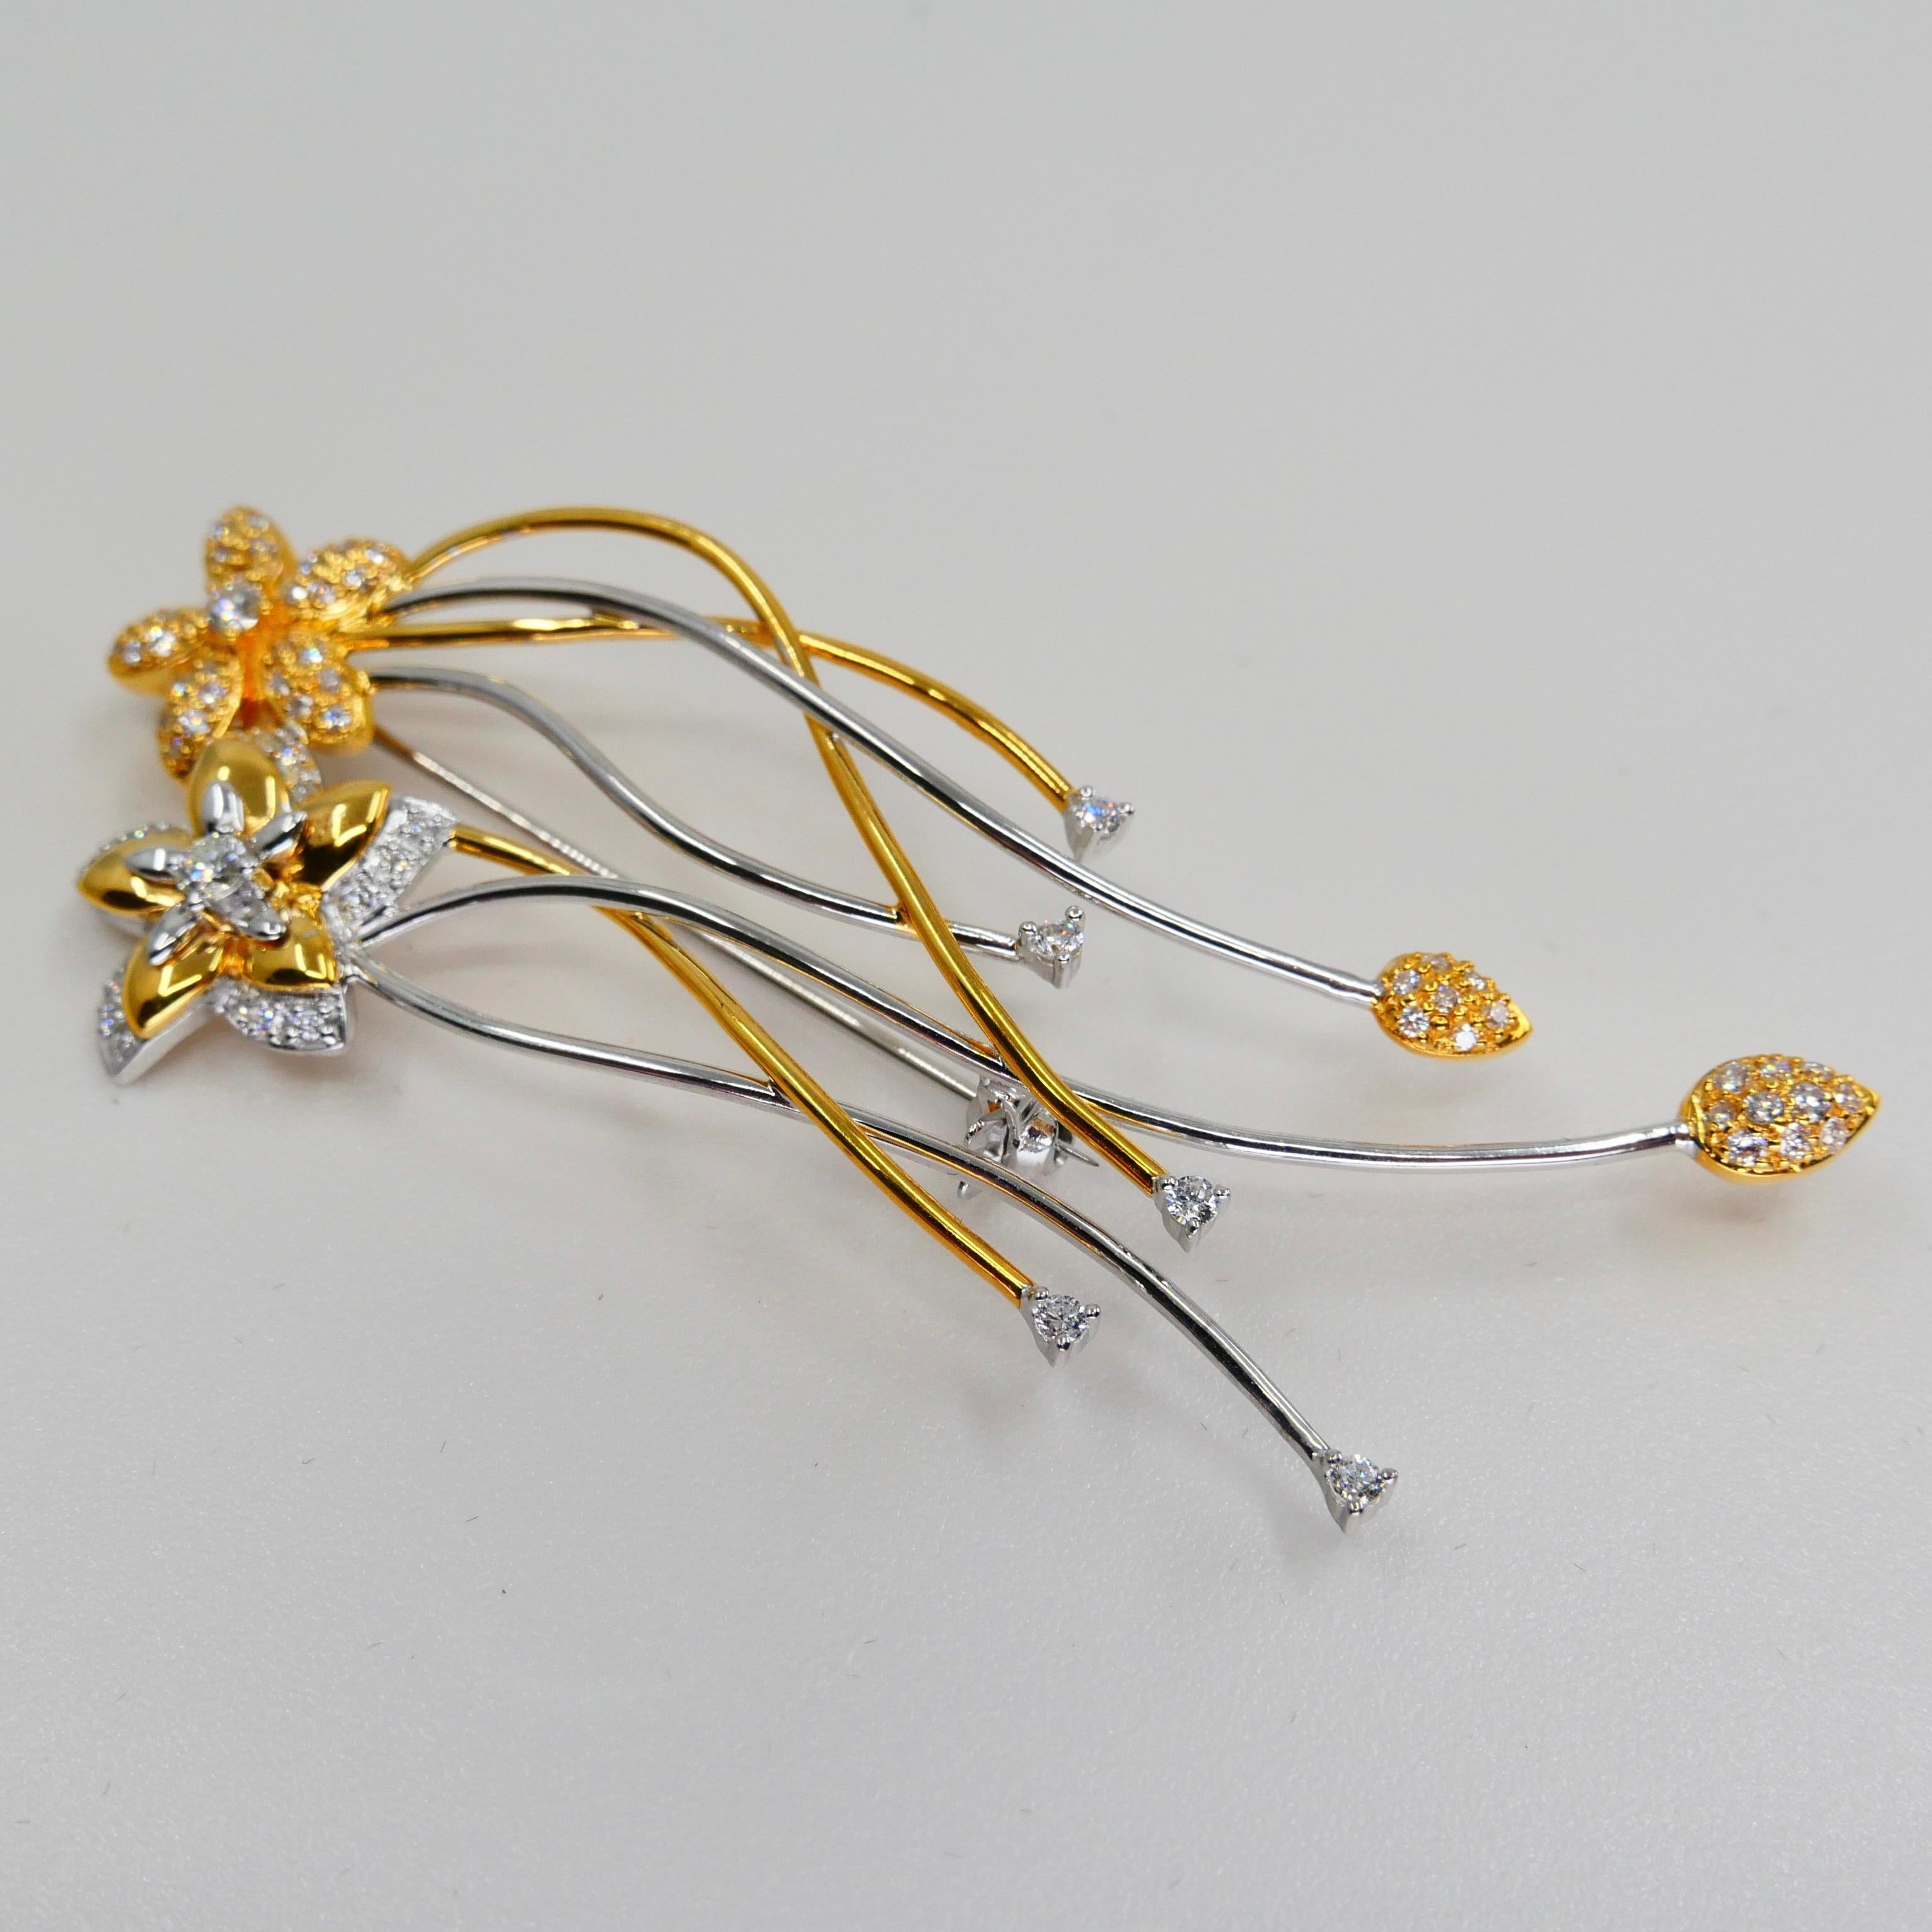 18K Two Tone White & Yellow Gold, Diamond Flower Brooch, Beautiful Workmanship For Sale 4